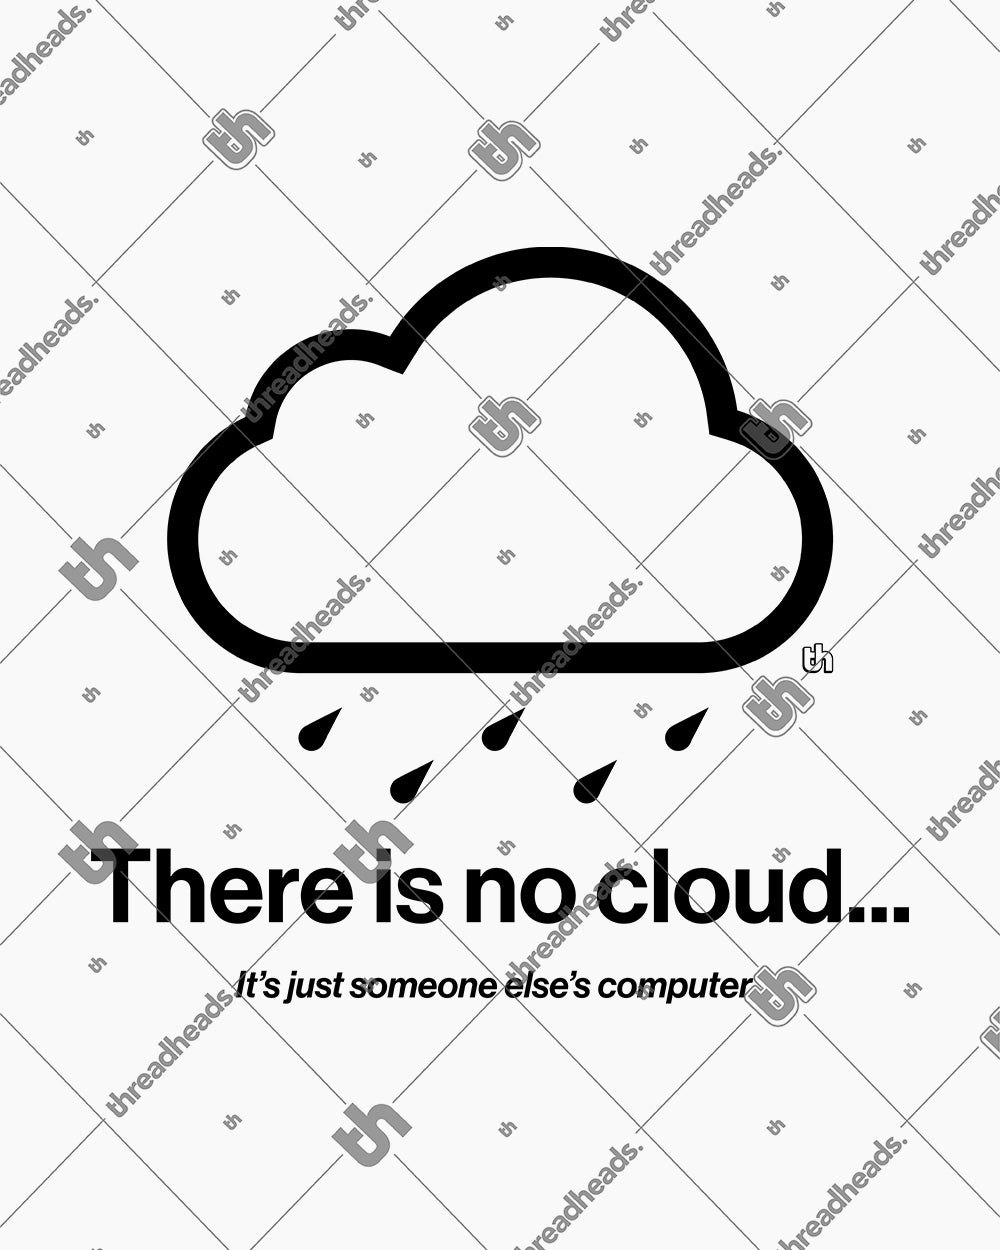 There Is No Cloud Hoodie Australia Online #colour_white